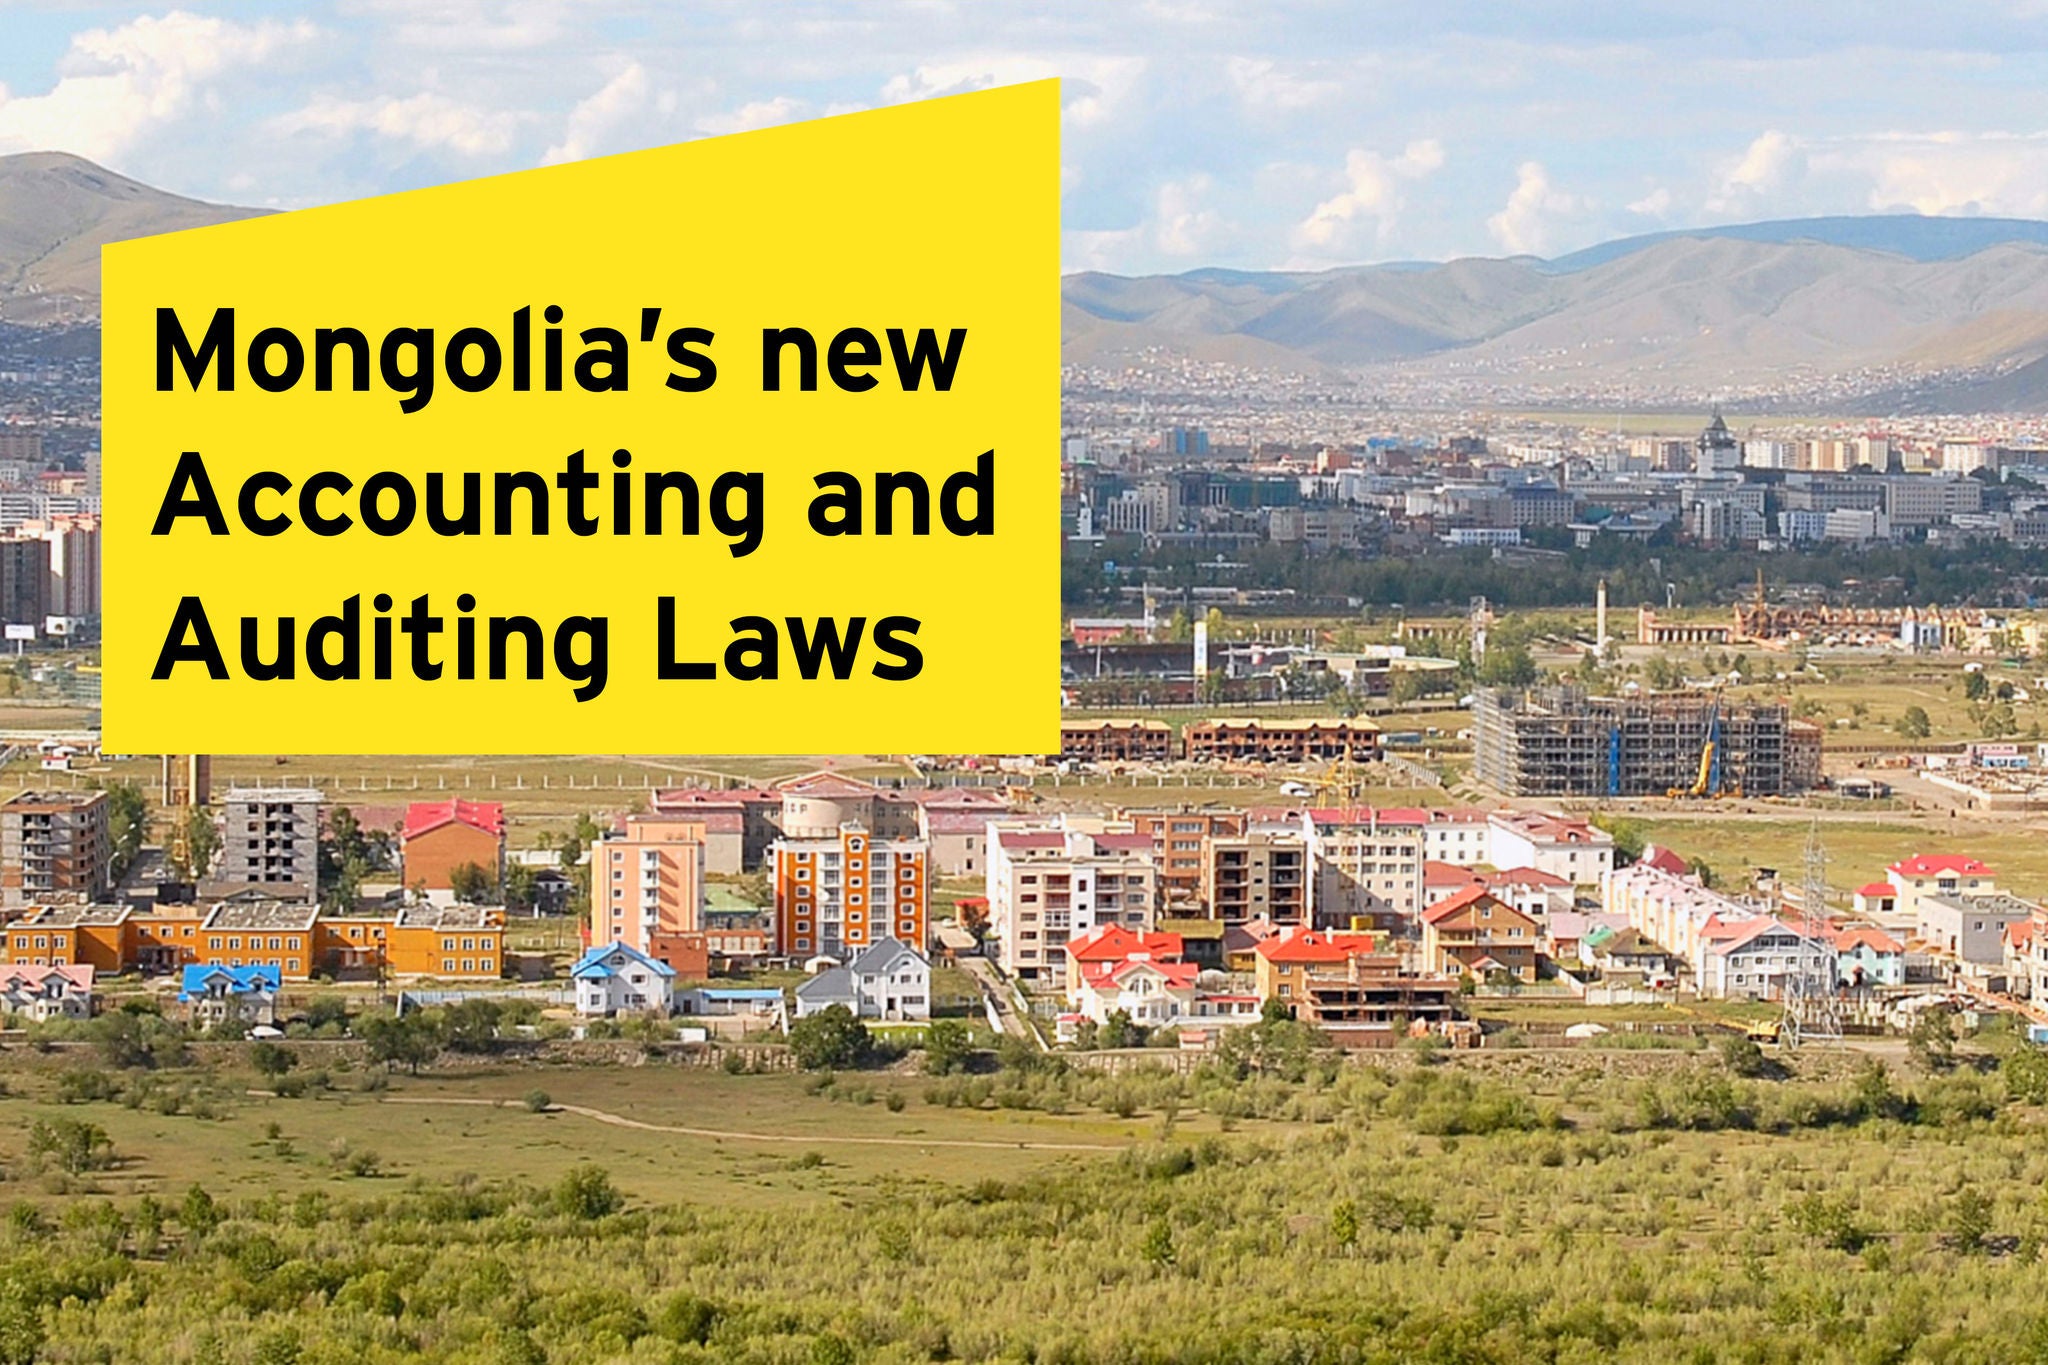 Mongolia new Accounting and Auditing Laws